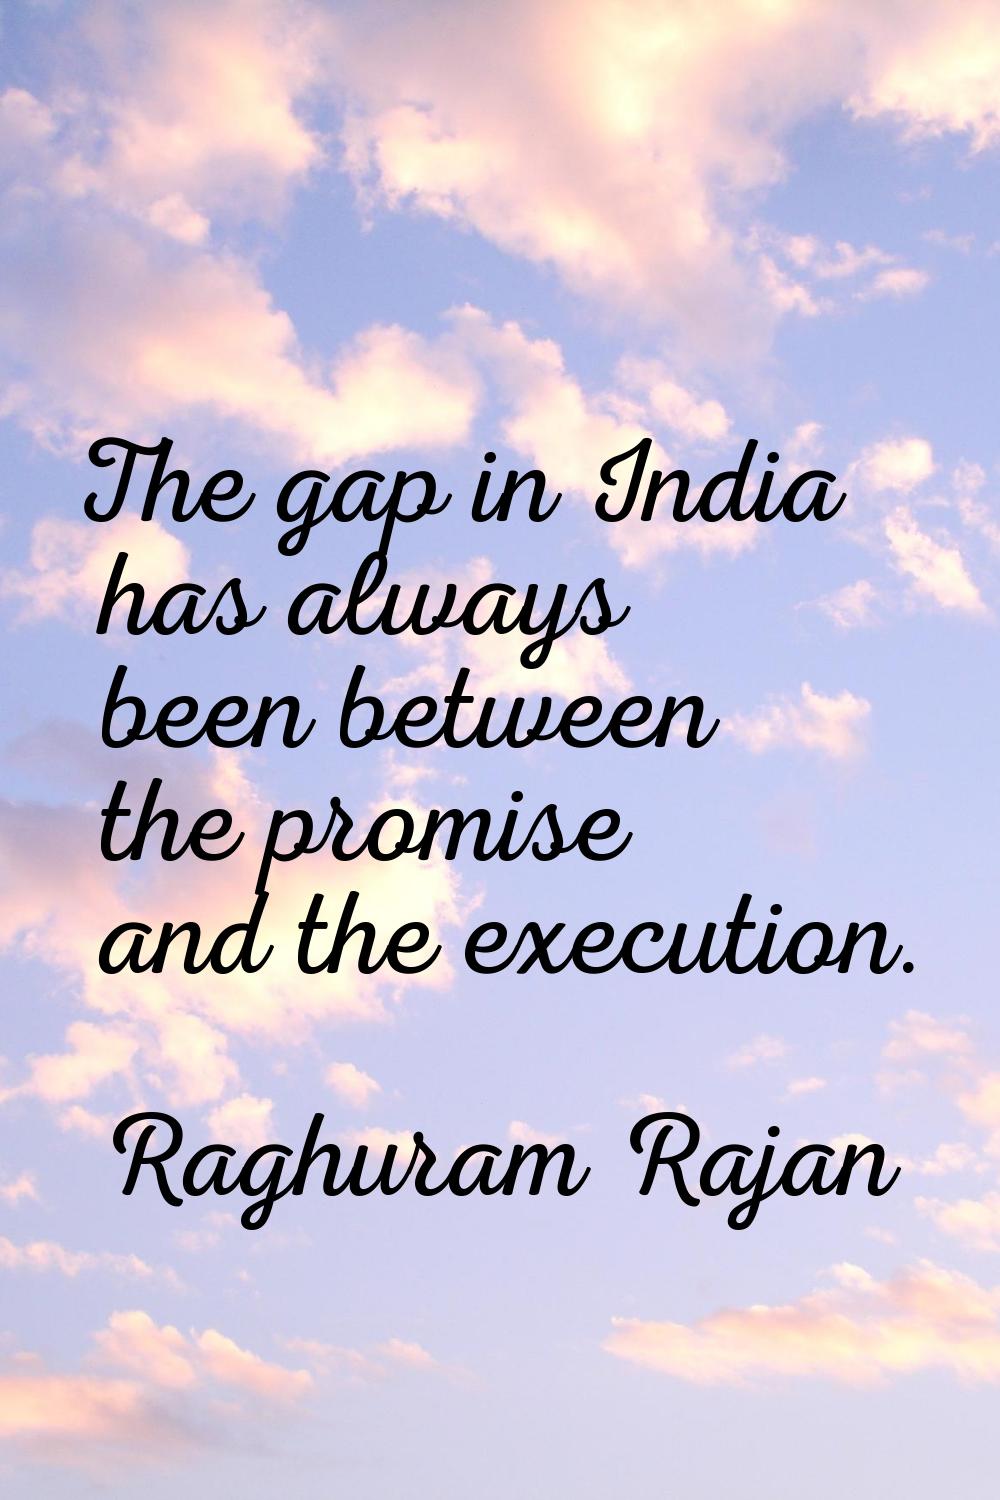 The gap in India has always been between the promise and the execution.